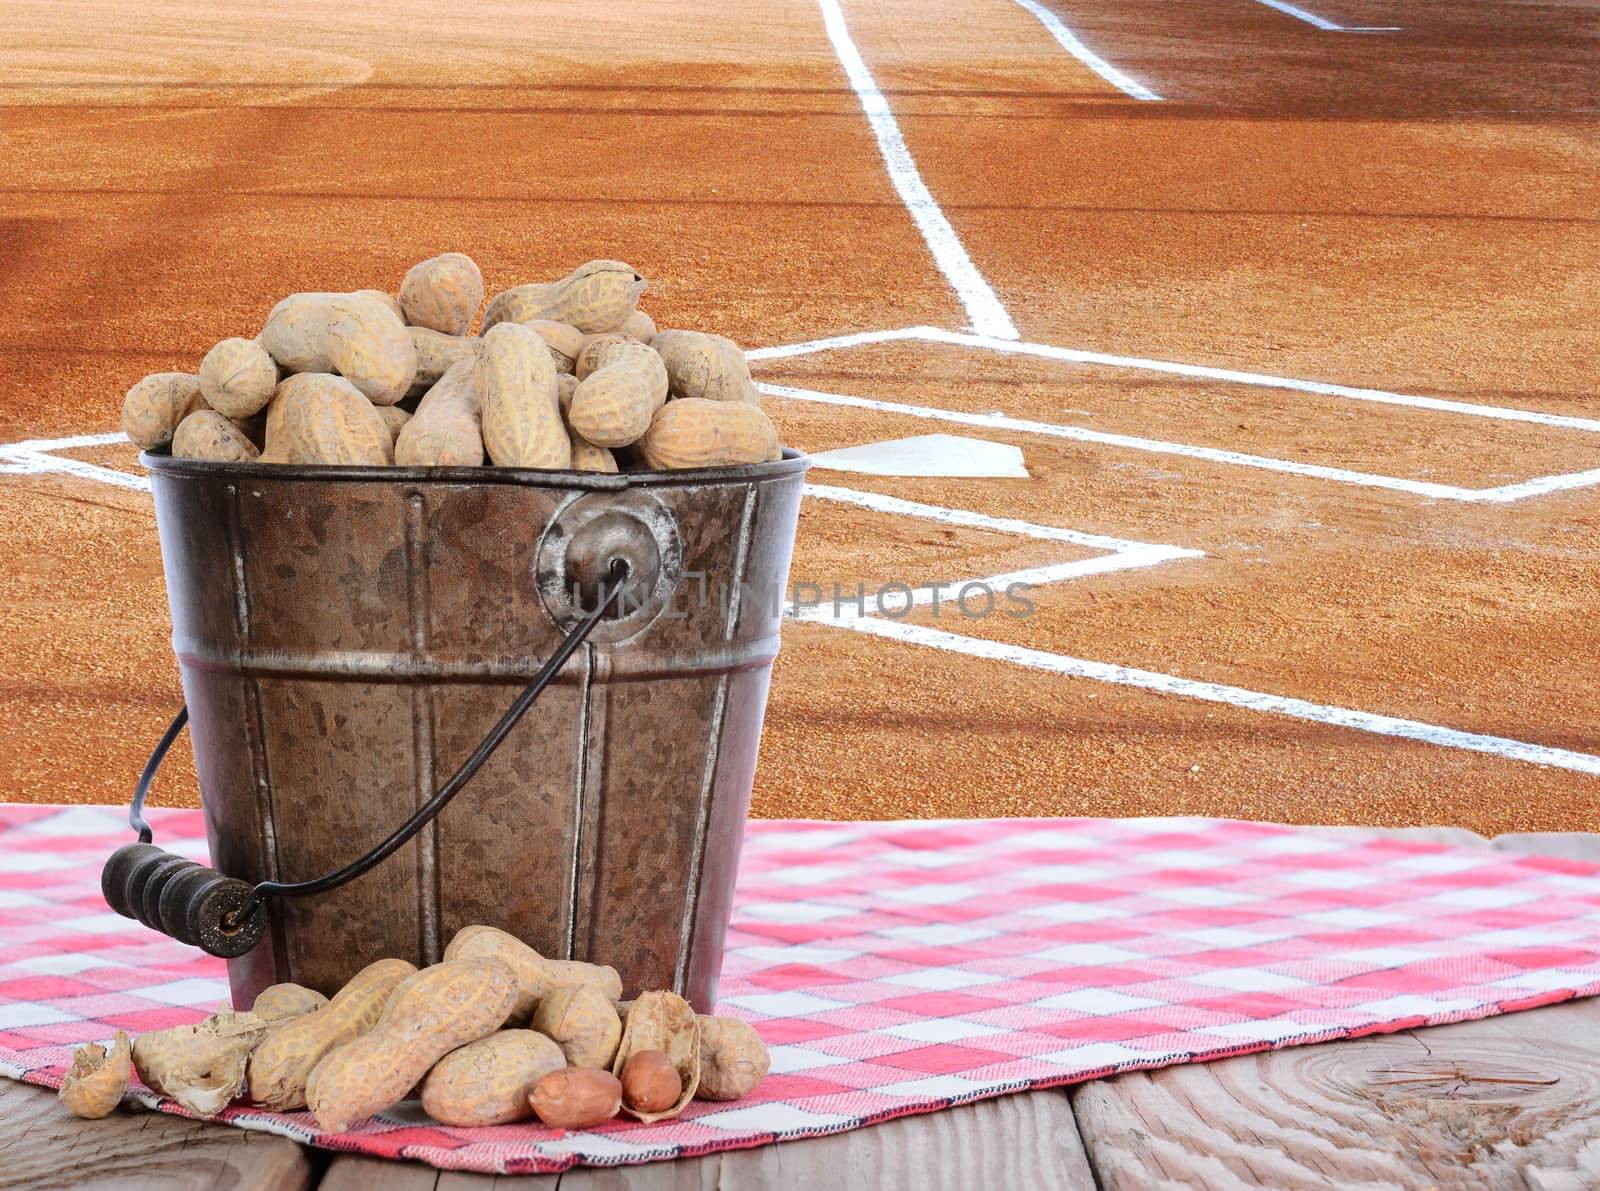 Closeup of a pail full of peanuts on a wood picnic table and a red checked tablecloth. Horizontal format with a baseball field background with copy space